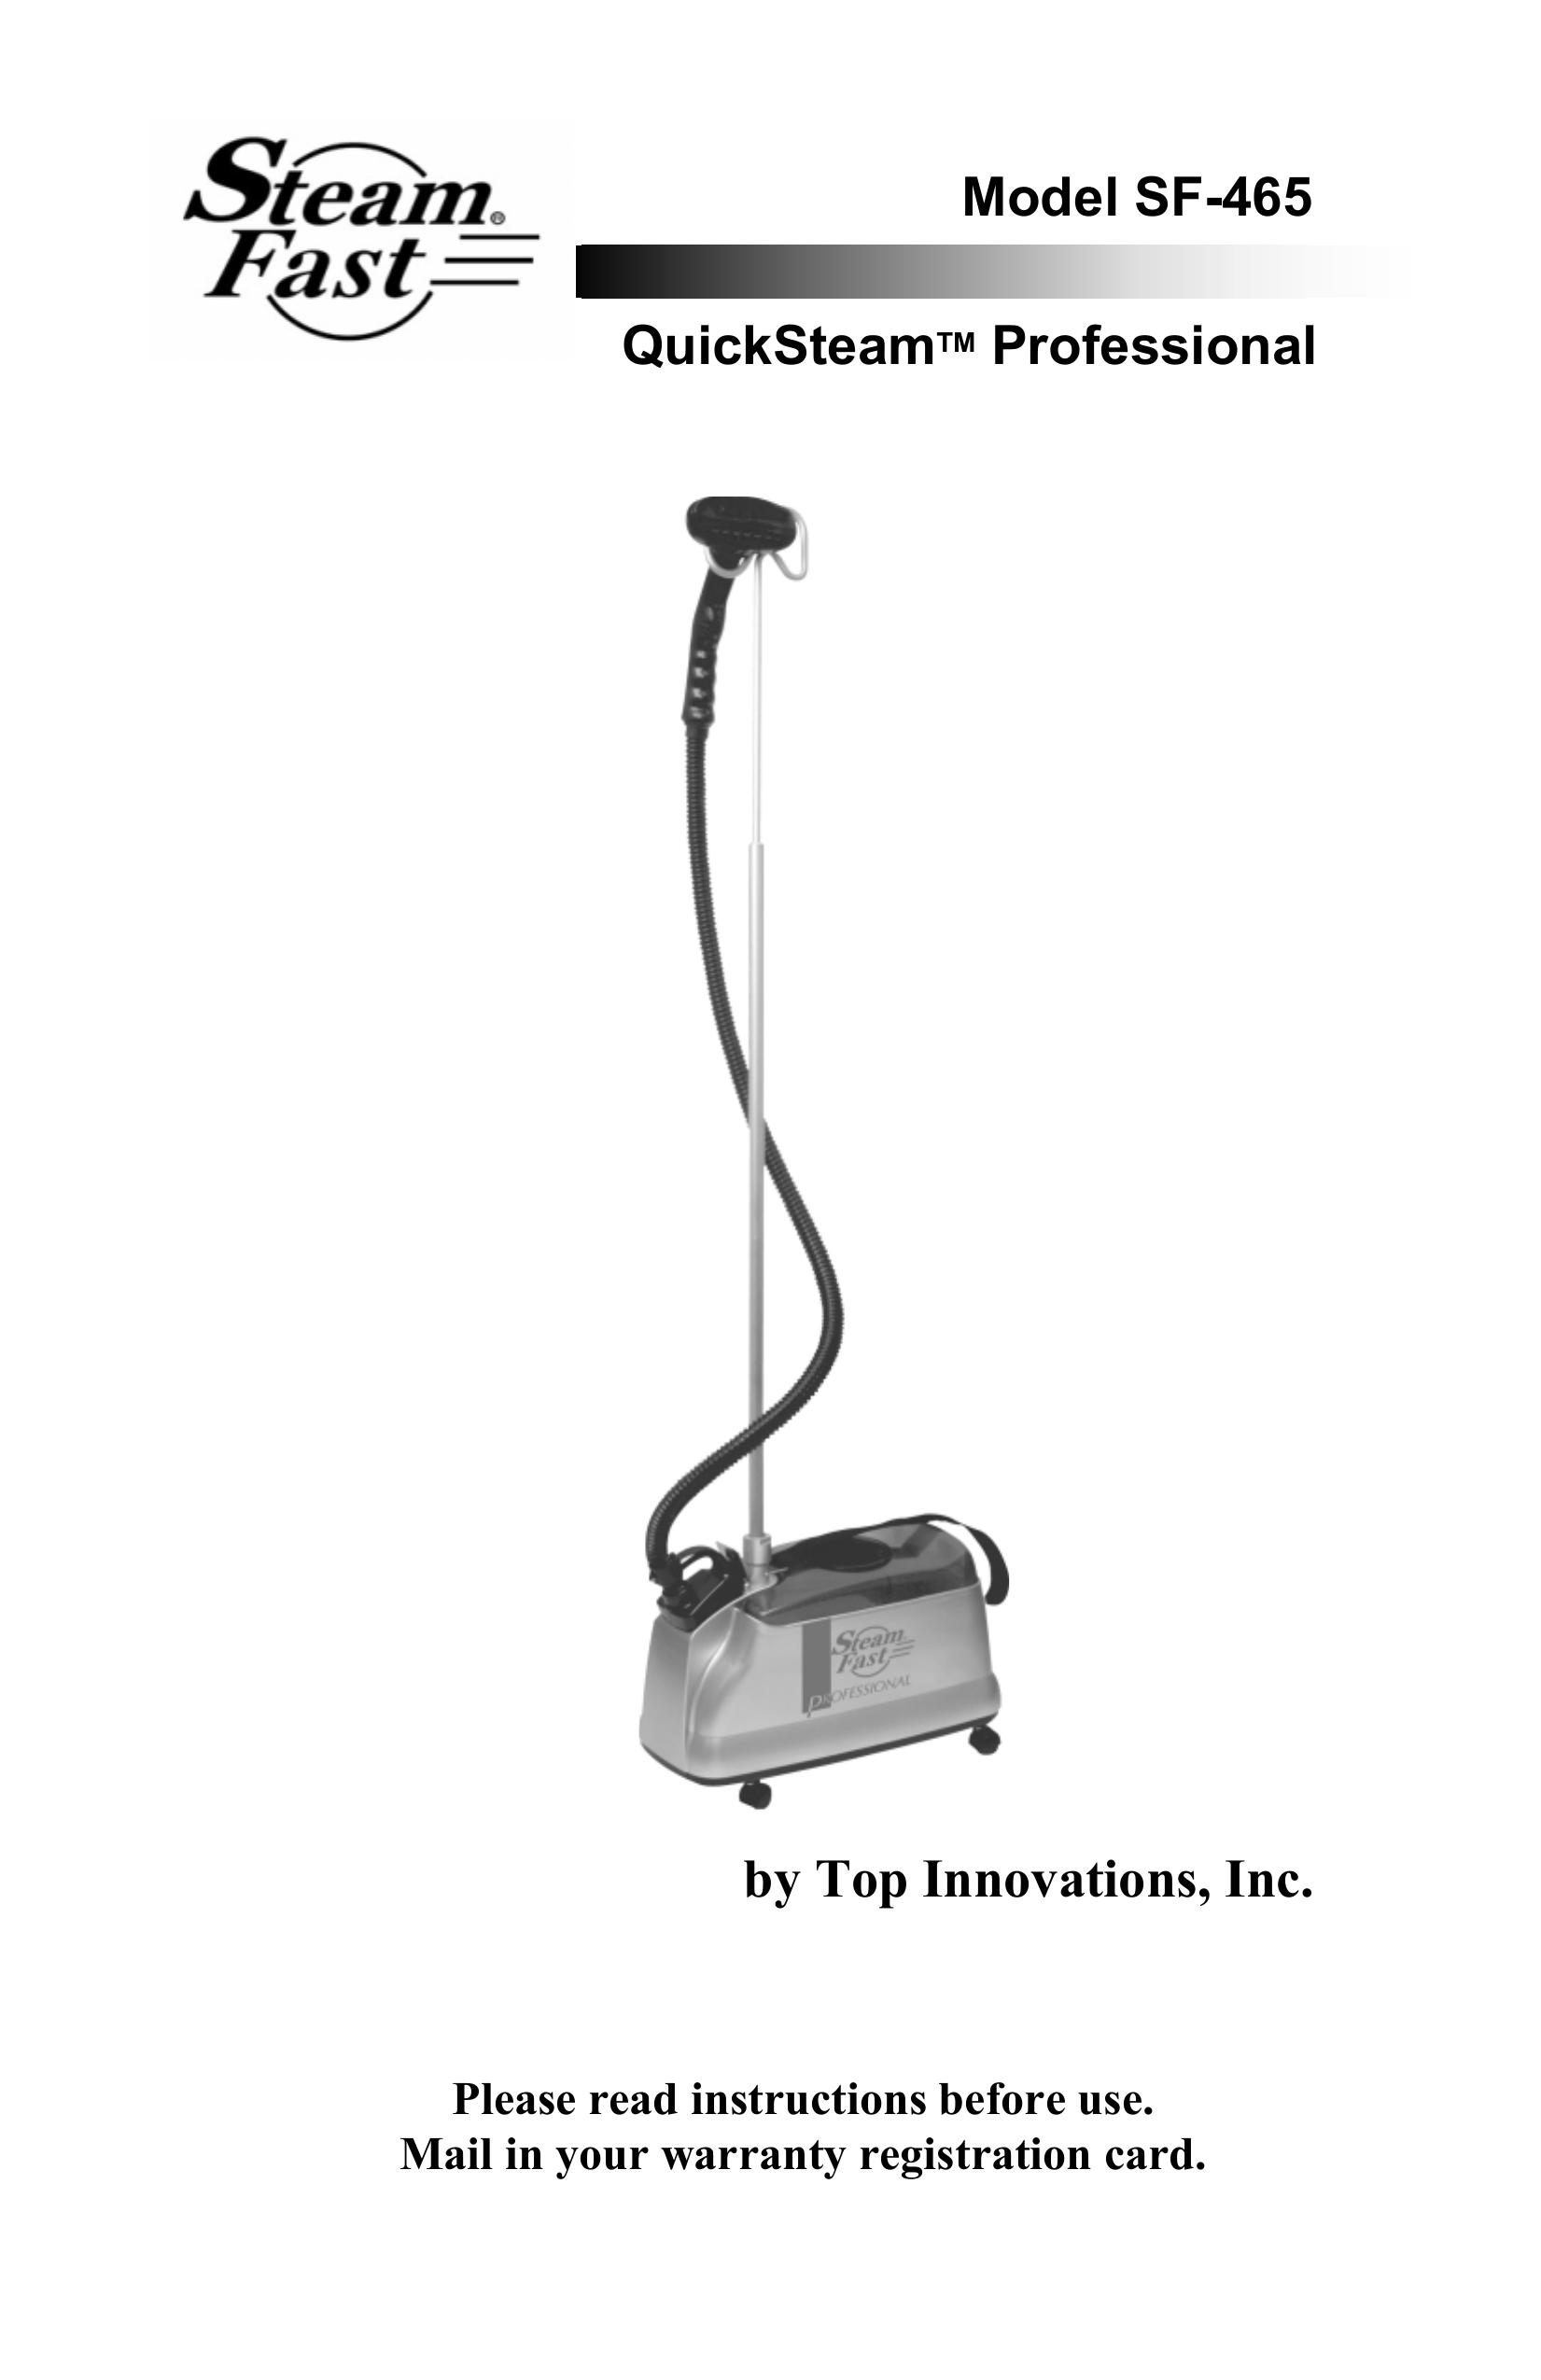 Top Innovations SF-465 Iron User Manual